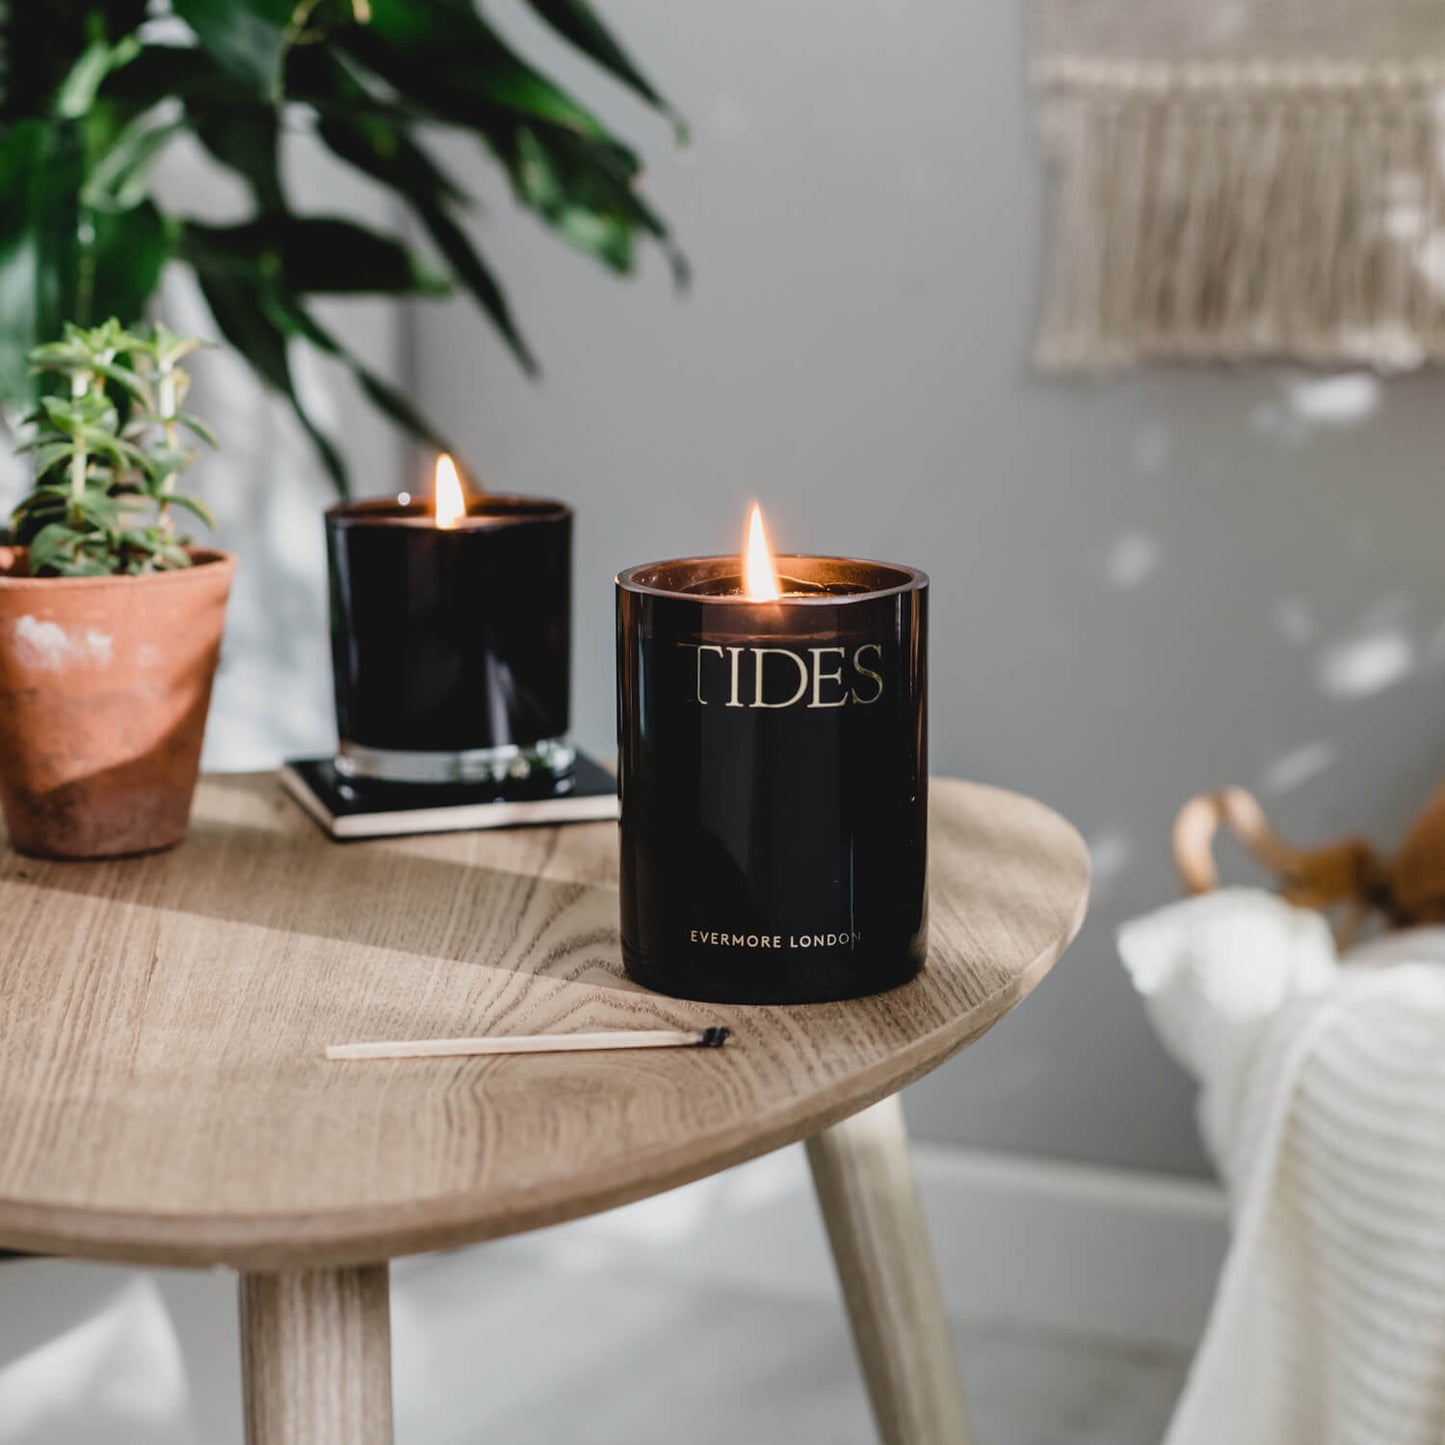 Tides Scented Candle by Evermore